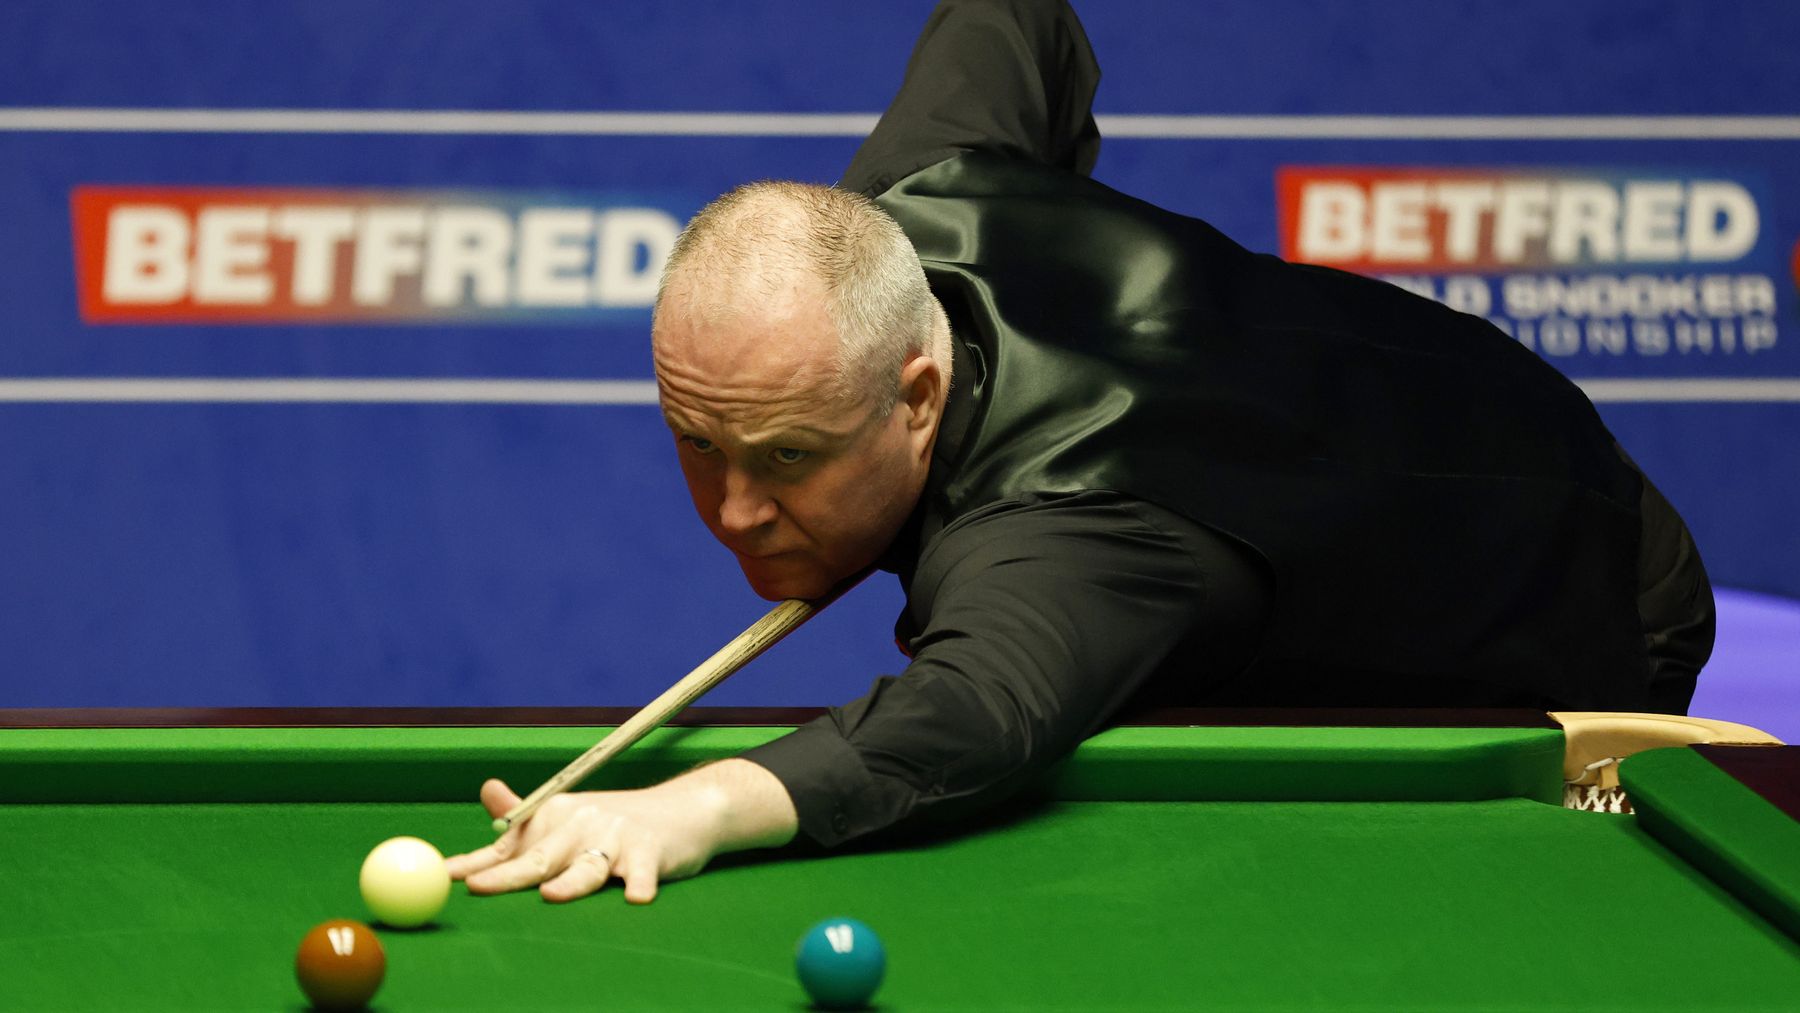 Snooker results John Higgins and defending champion Mark Williams crash out of the British Open